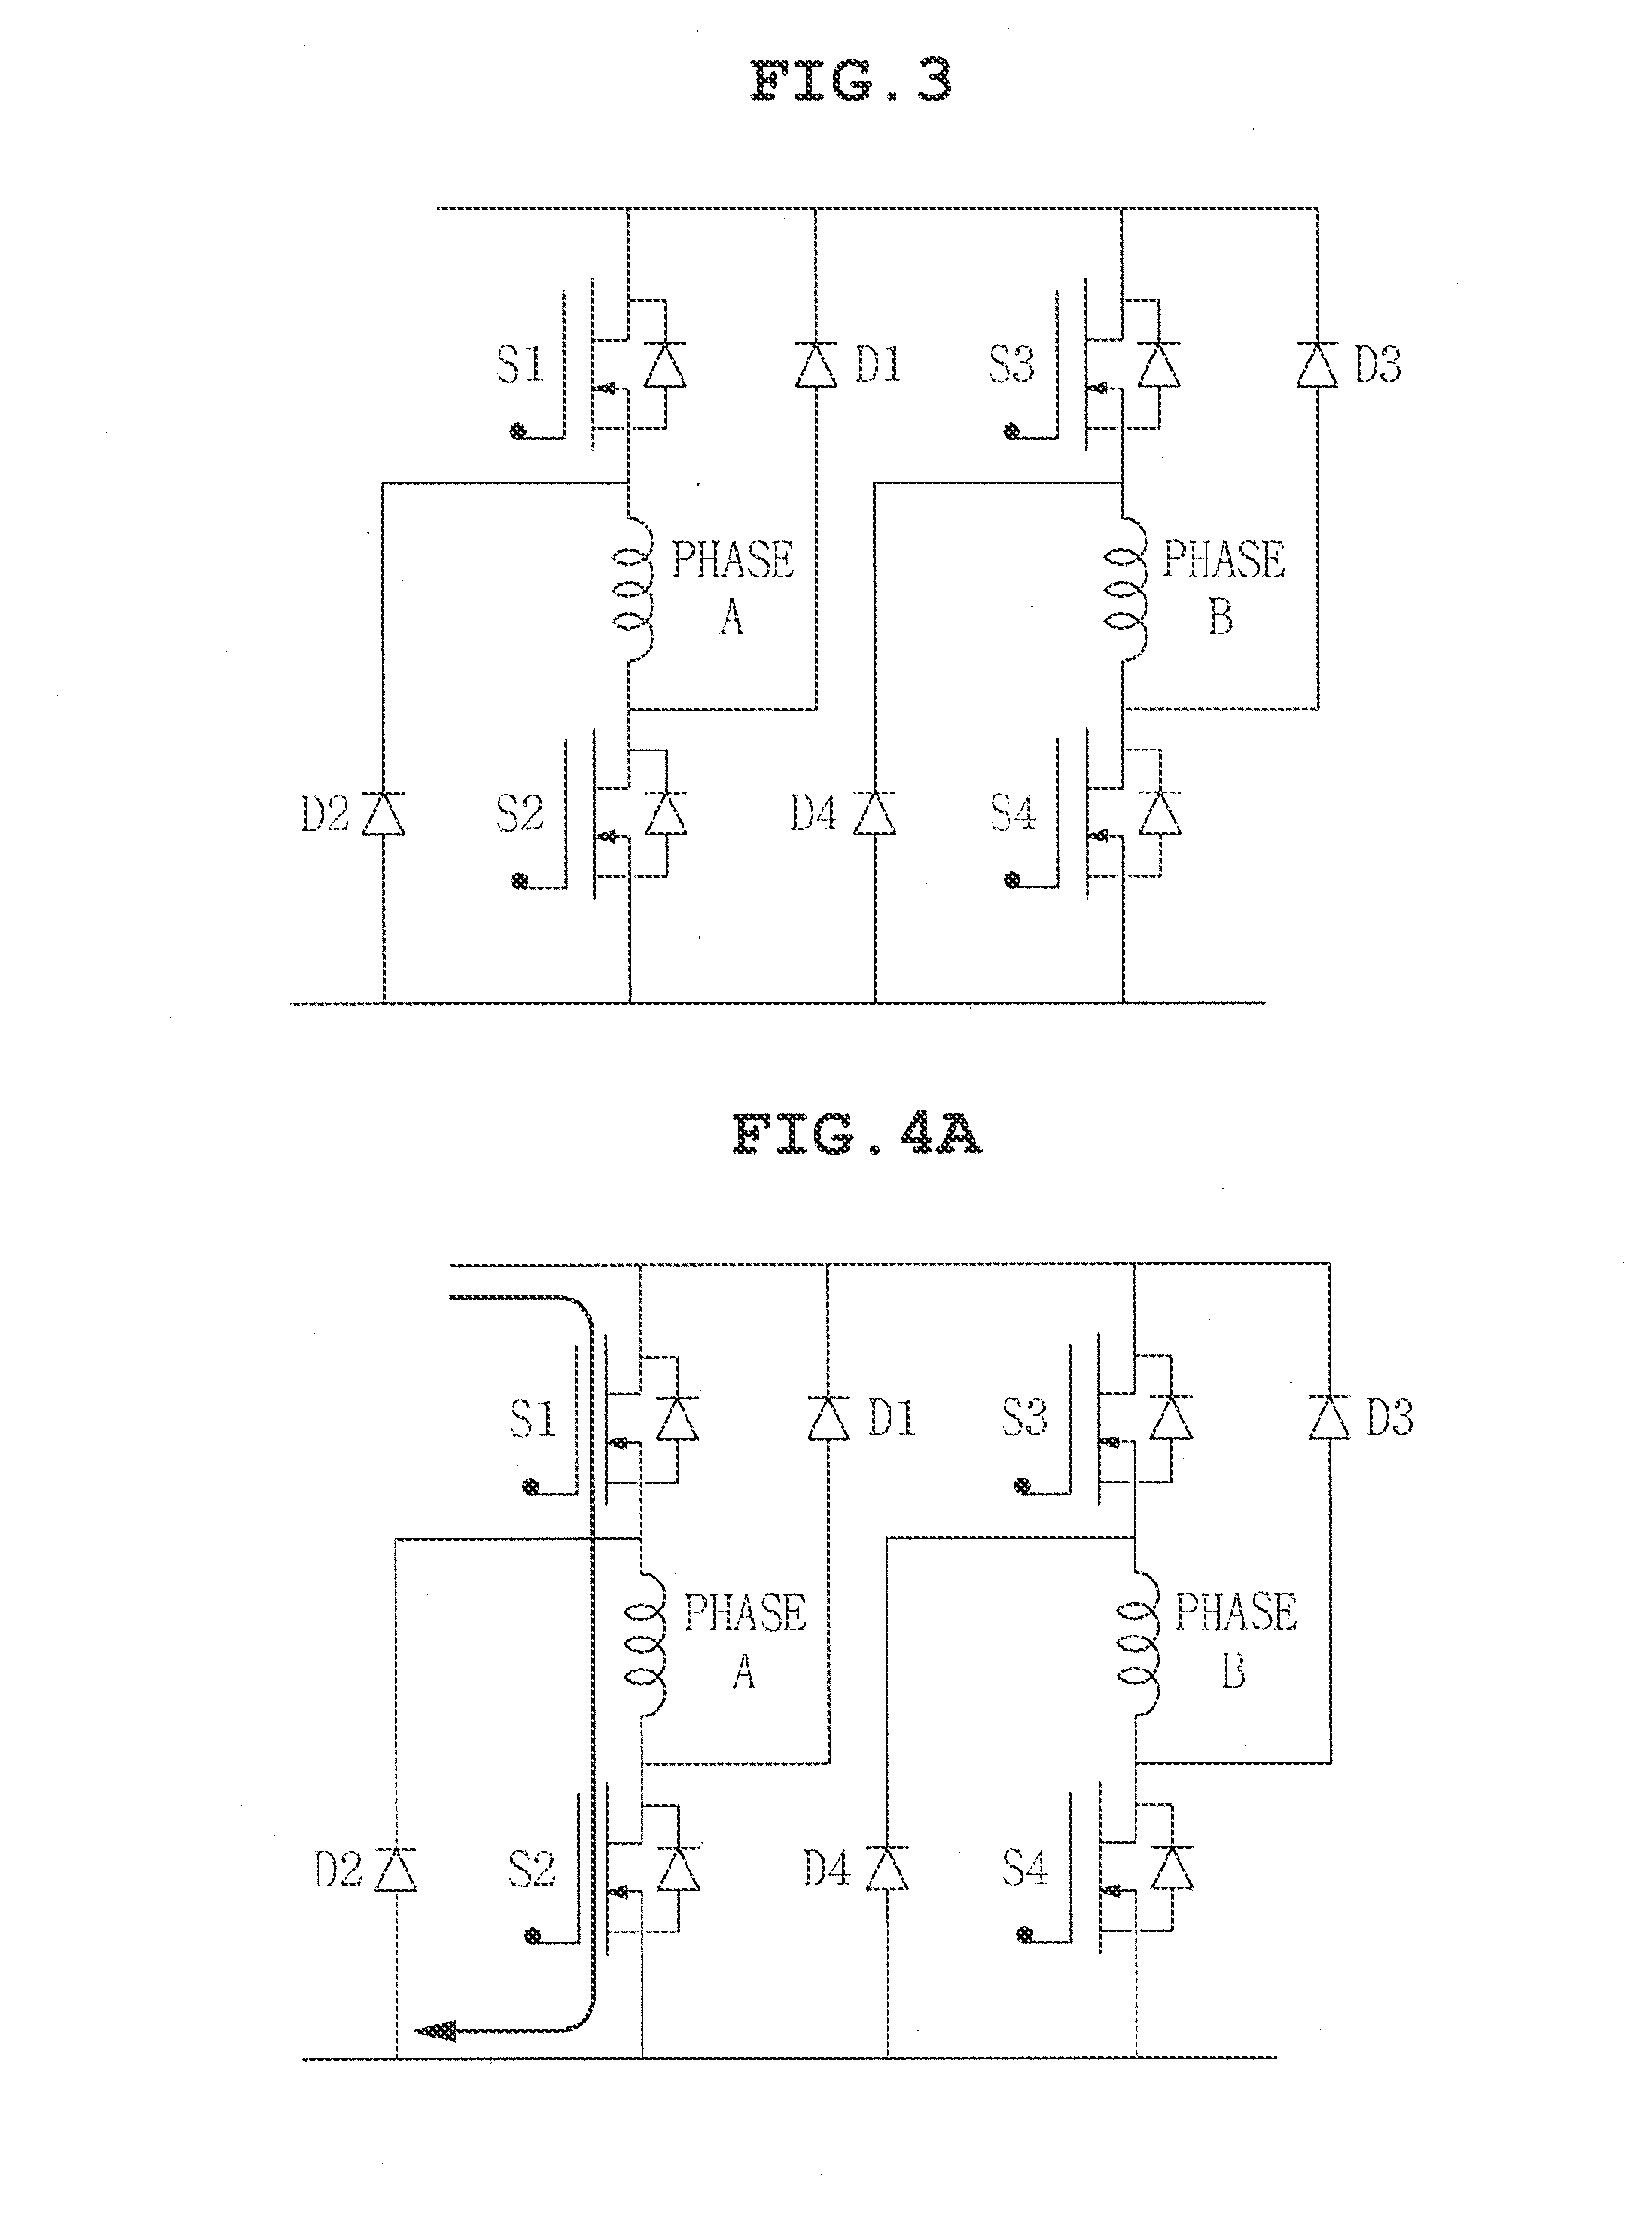 Motor acceleration apparatus and method